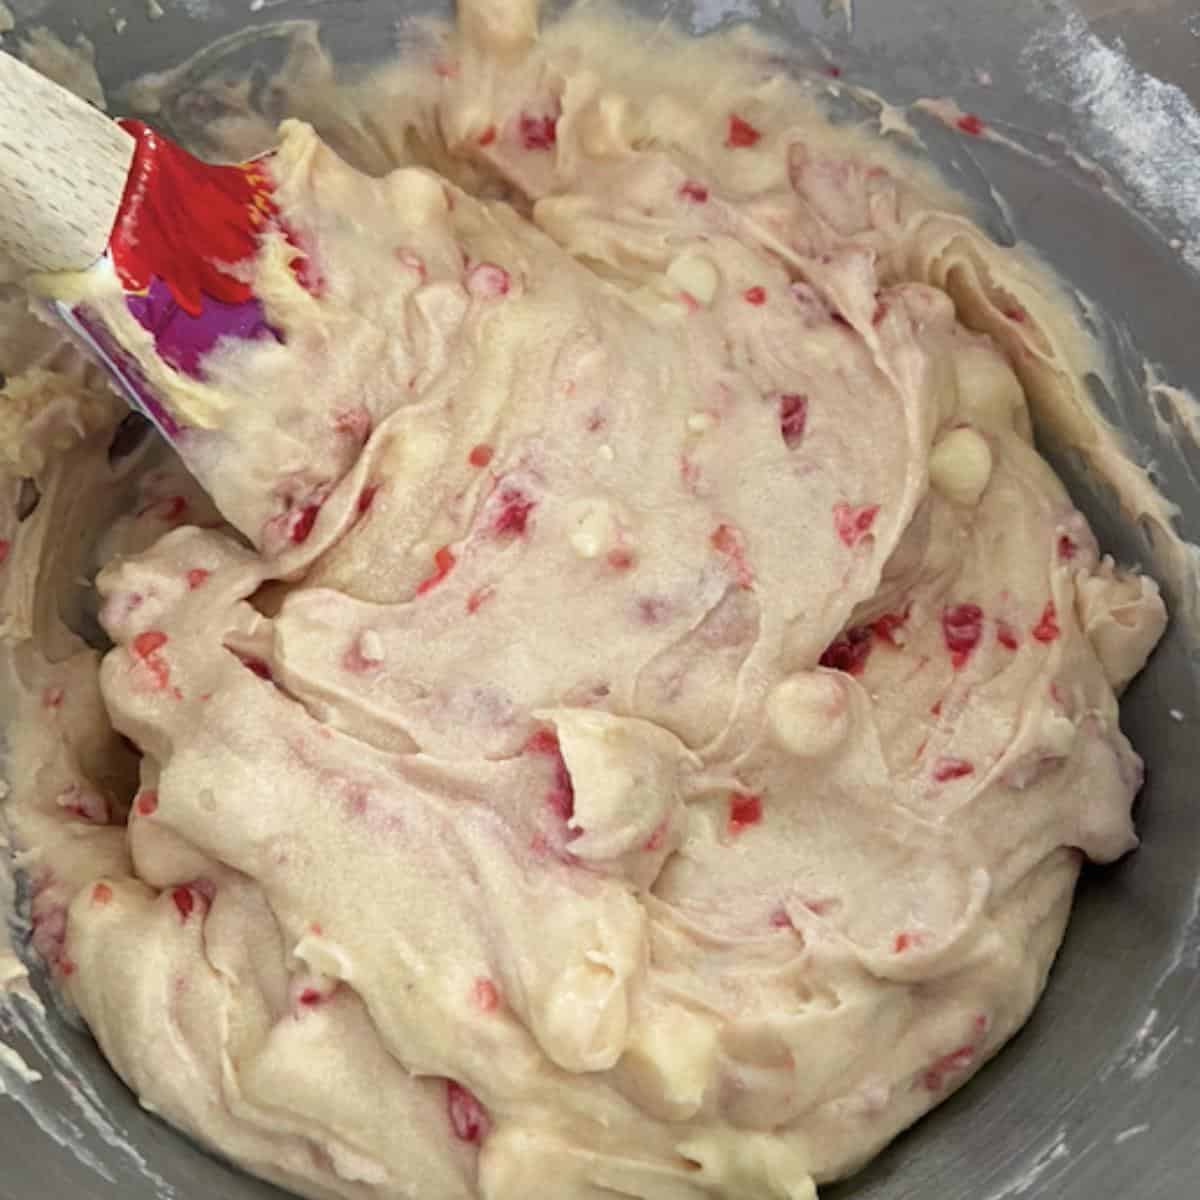 Raspberries and white chocolate chips mixed into batter in mixer.